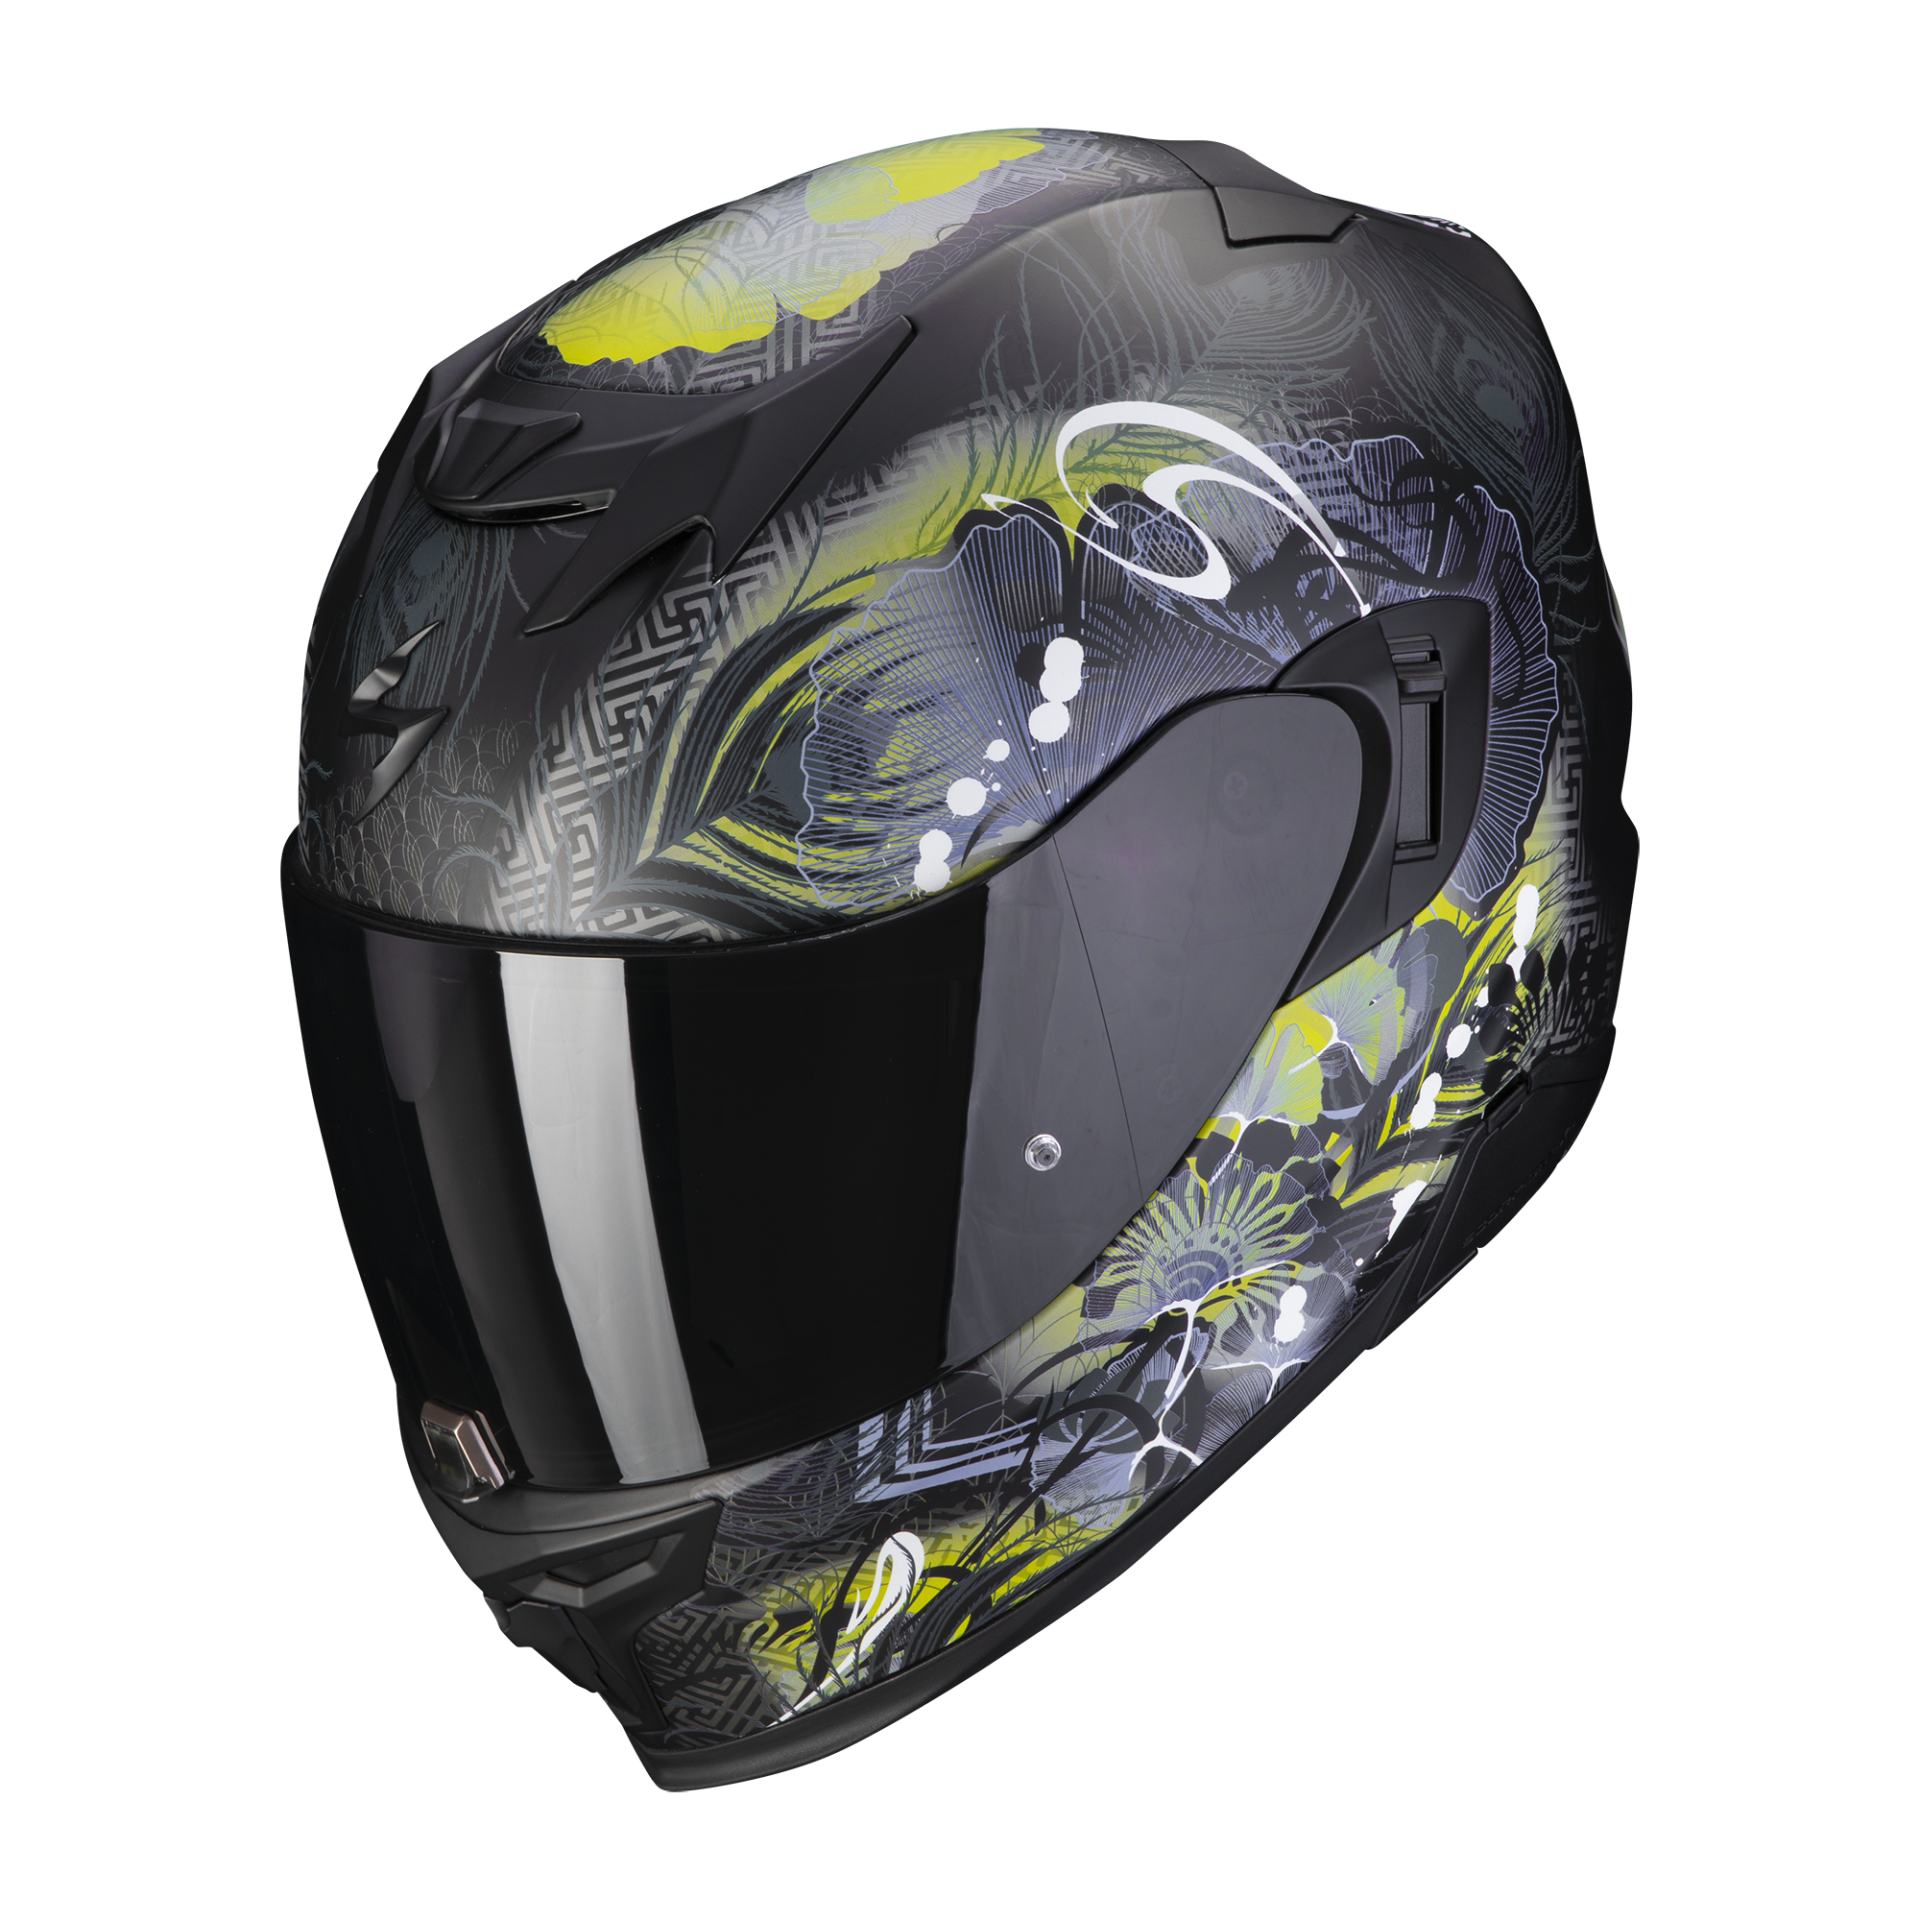 Image of Scorpion Exo-520 Evo Air Melrose Mat Black-Yellow Casque Intégral Taille S